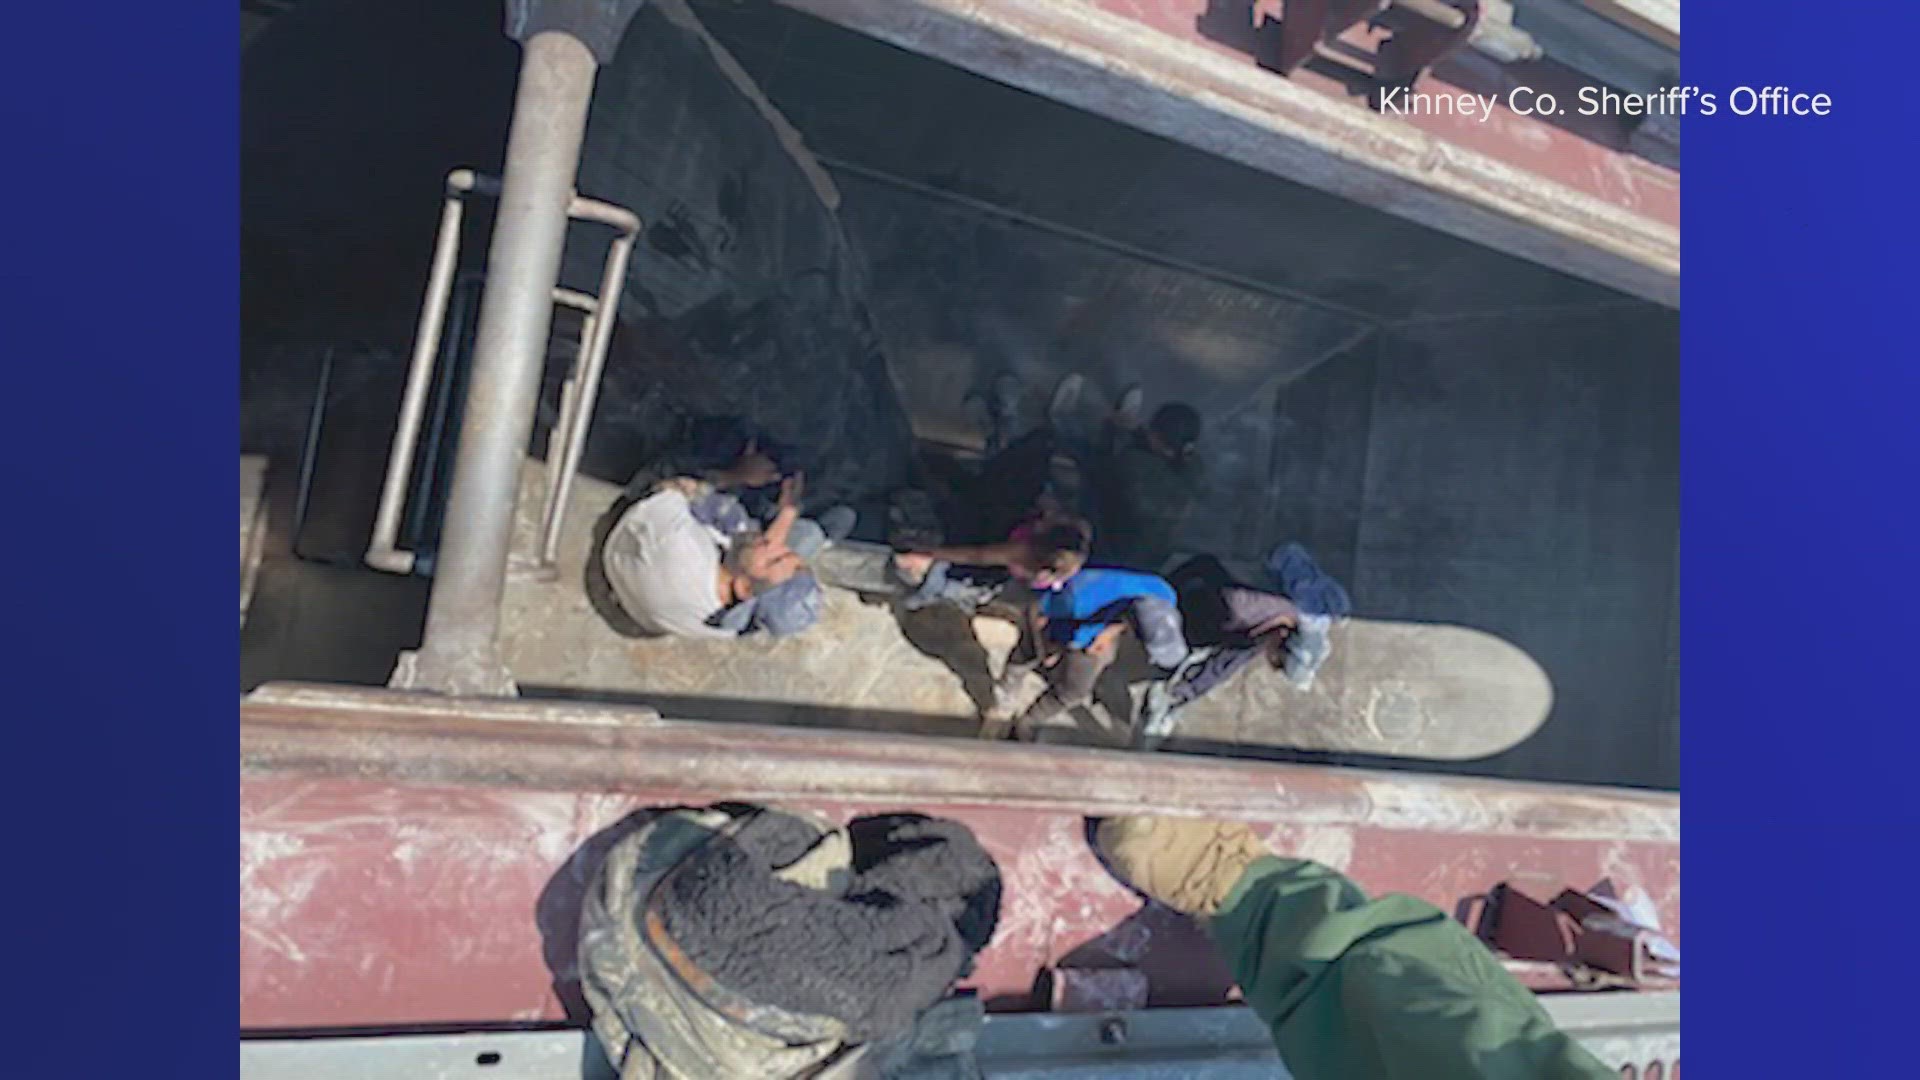 According to a Facebook post from Uvalde County Constable Emmanuel Zamora, more than 100 migrants were inside of a train and injuries have been reported.